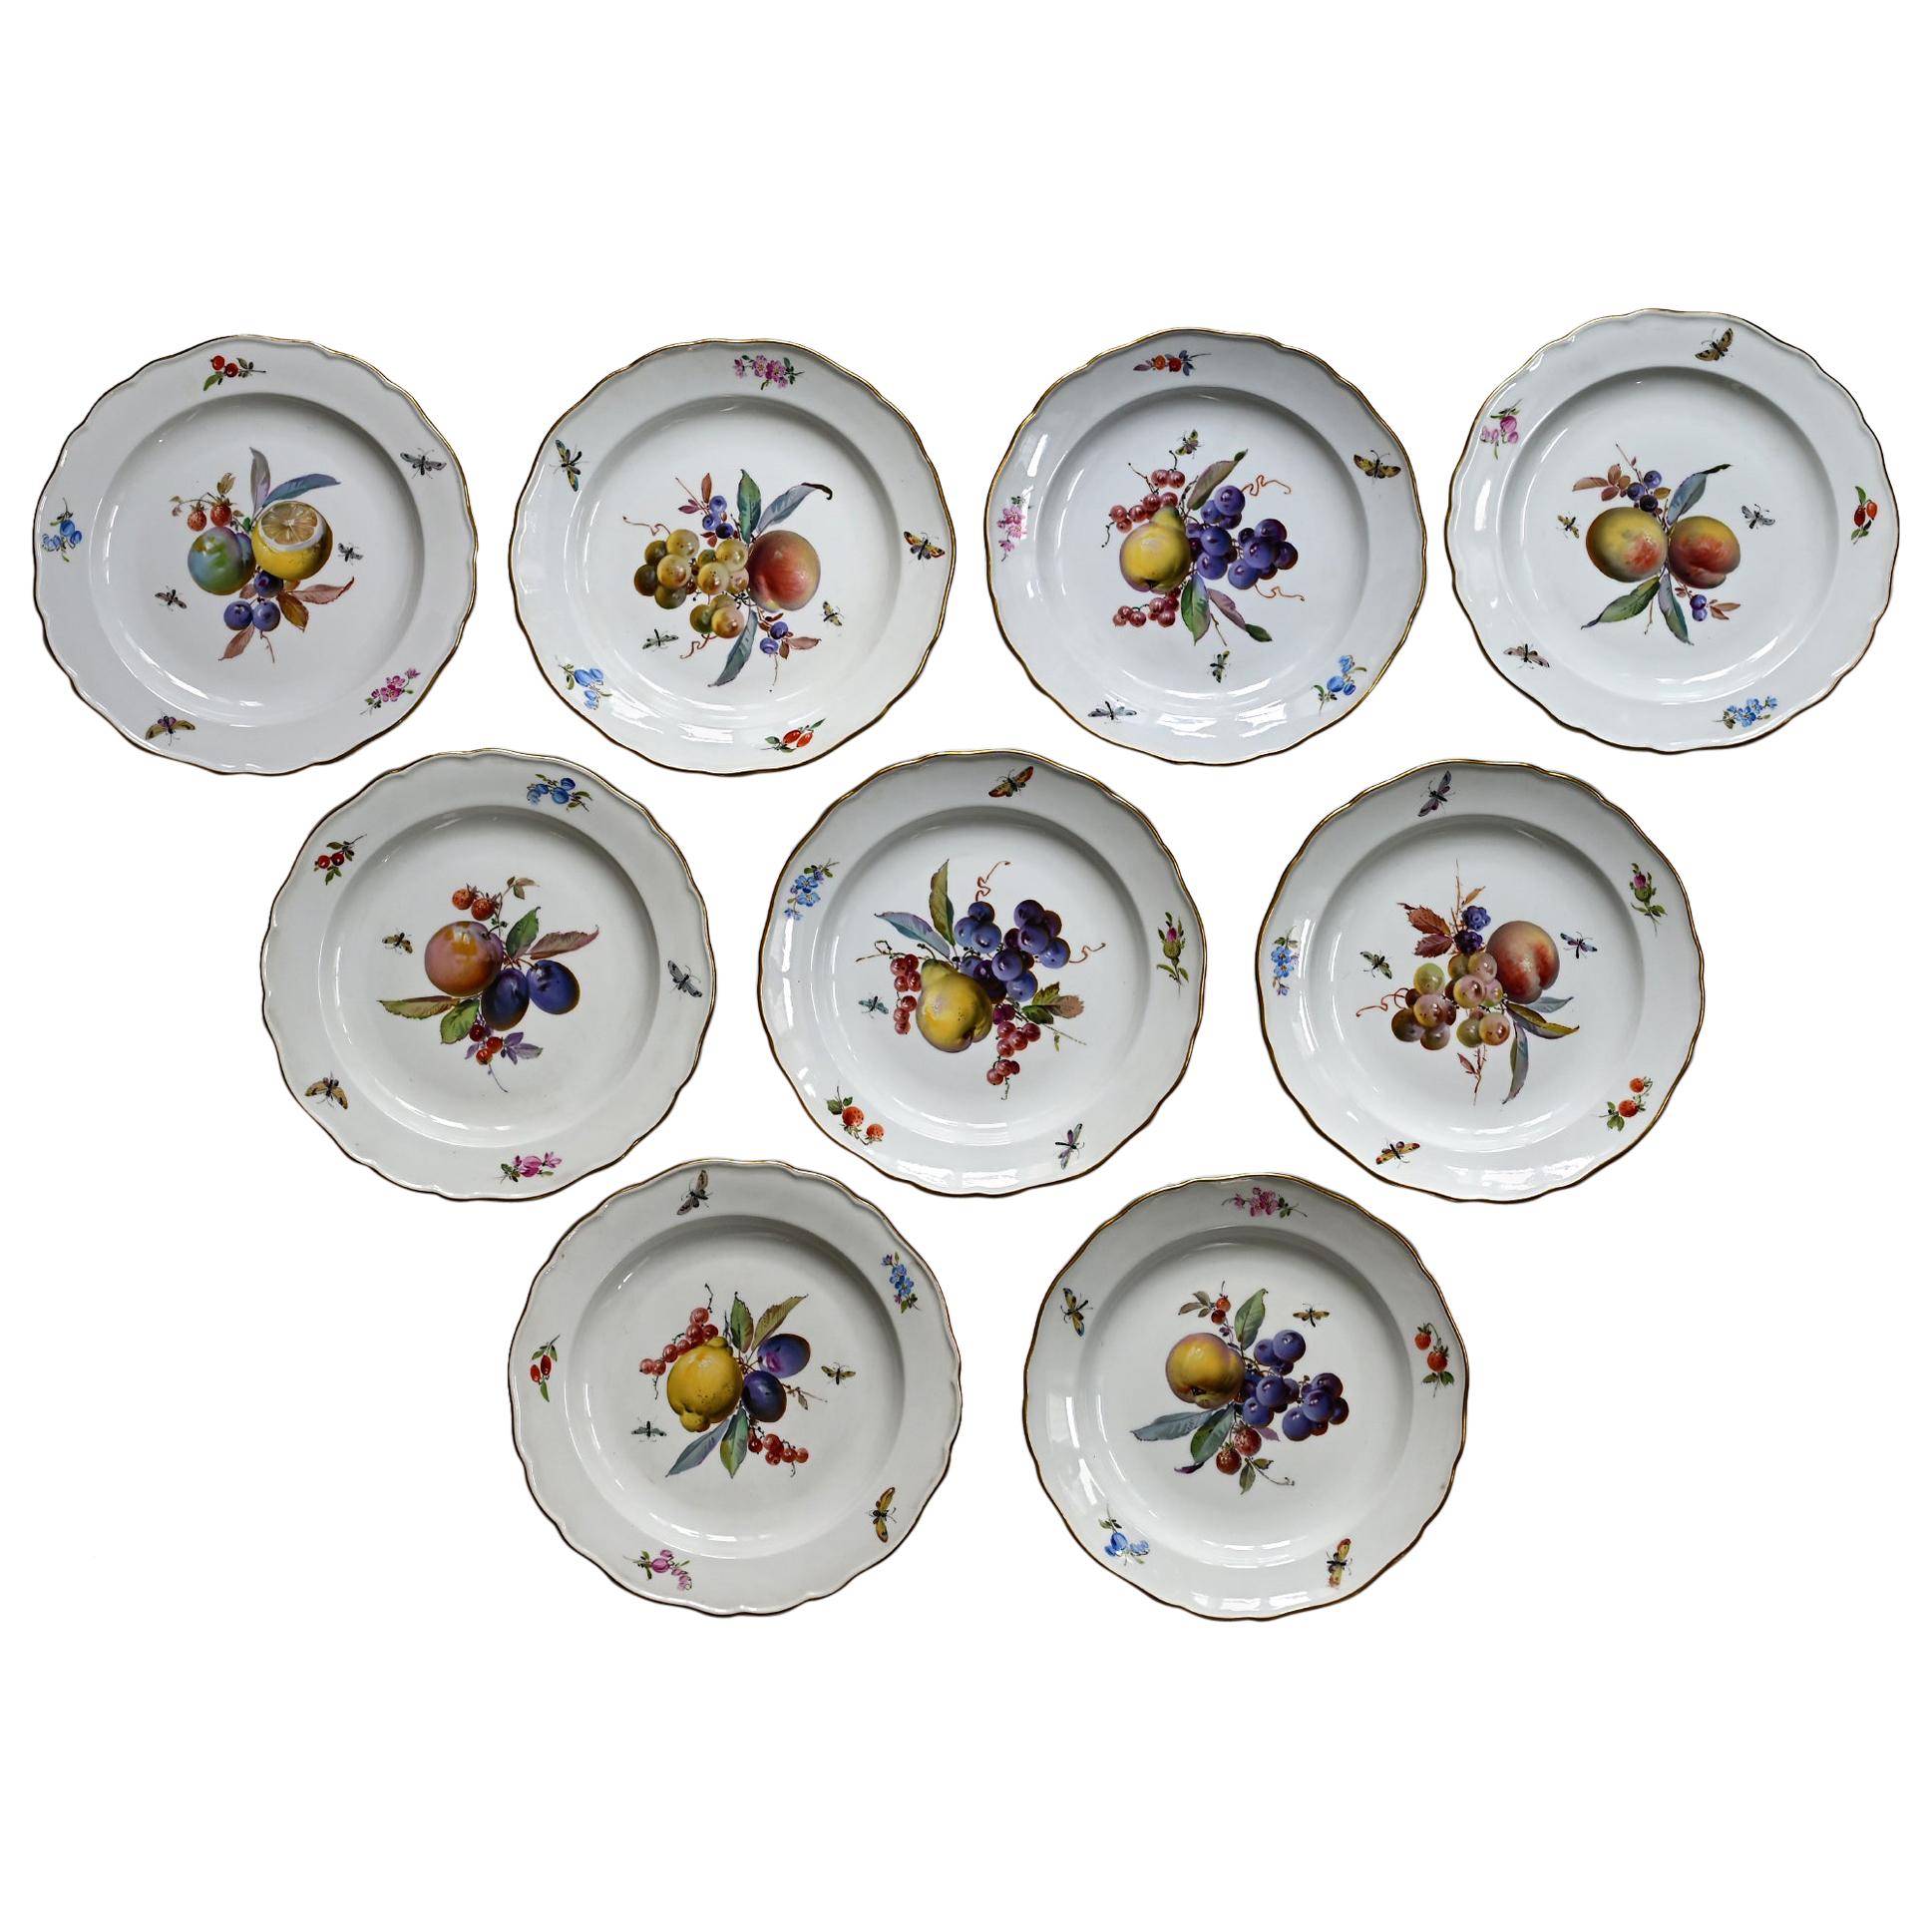 Set of 12 Meissen Plates with Fruits, Insects and Flowers 19.Jhdt Porcelain